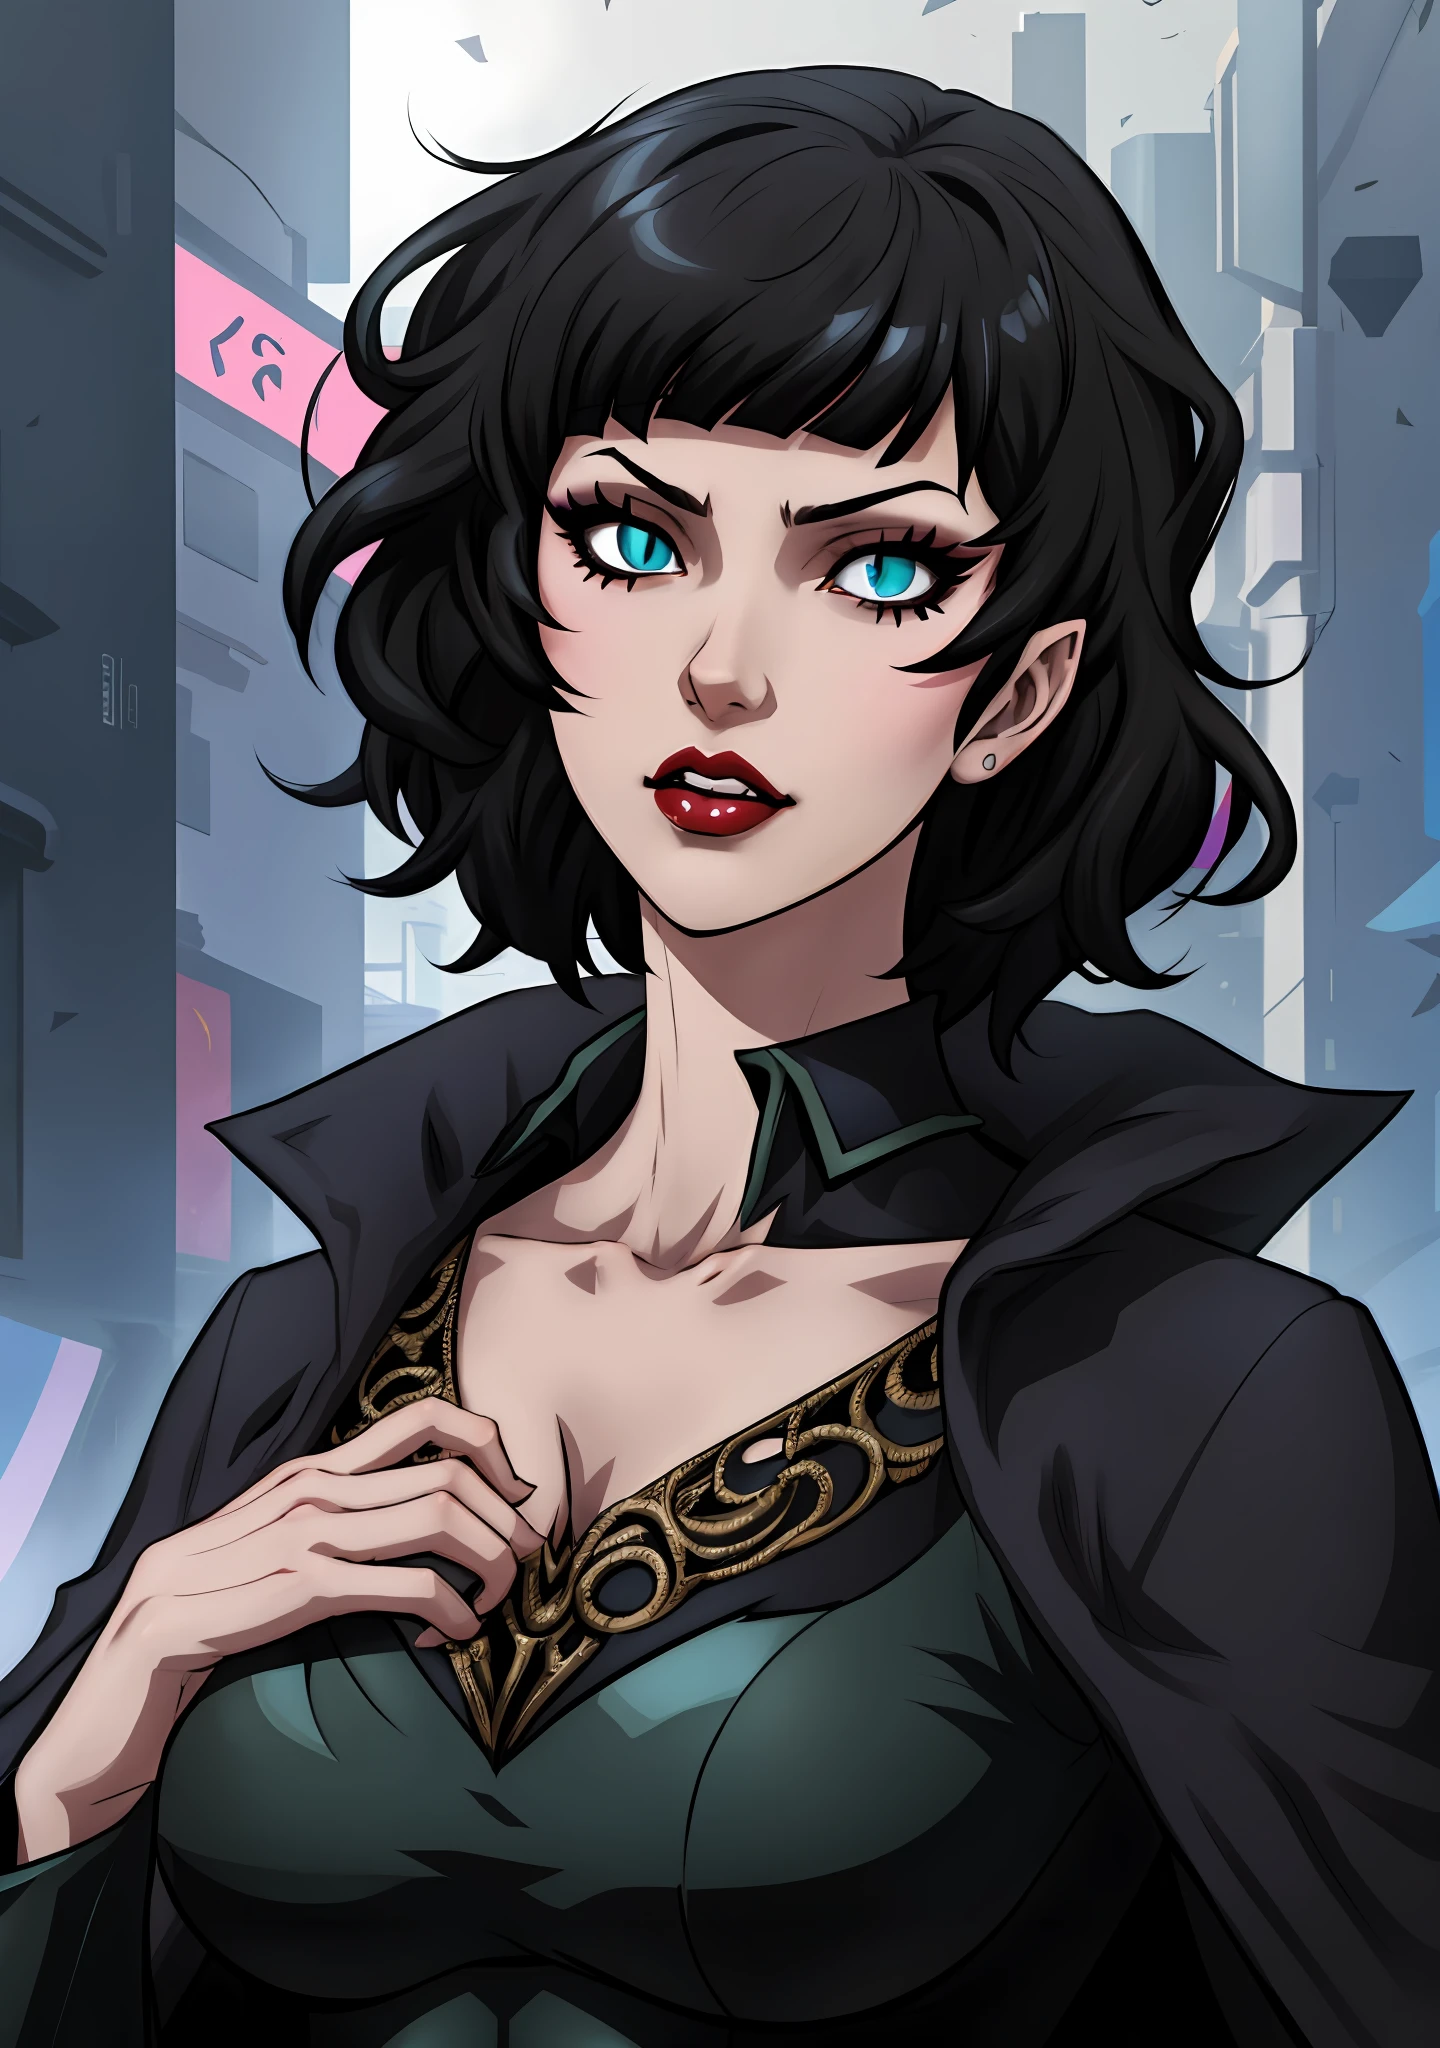 A closeup of a woman and some other poses, concept art, character content art,1girl, highres, sharp focus, pixiv masterpiece, ((intricate details)), highly detailed,highly detailed exquisite fanart, commission for high resolution, gothic makeup,snake eyes,snake eyes, blue eyes, pale skin, fair skin, short black hair, dark hair, short hair,  cyberpunk hair, muscular!,abdomen, pointy ear, vampire, costume: mercenary outfit, long coat, Underworld style clothing, neckline, revealing neckline, joy ride style, ilya kuvshinov,Anime Moe Artstyle, Female anime character, Anime character,